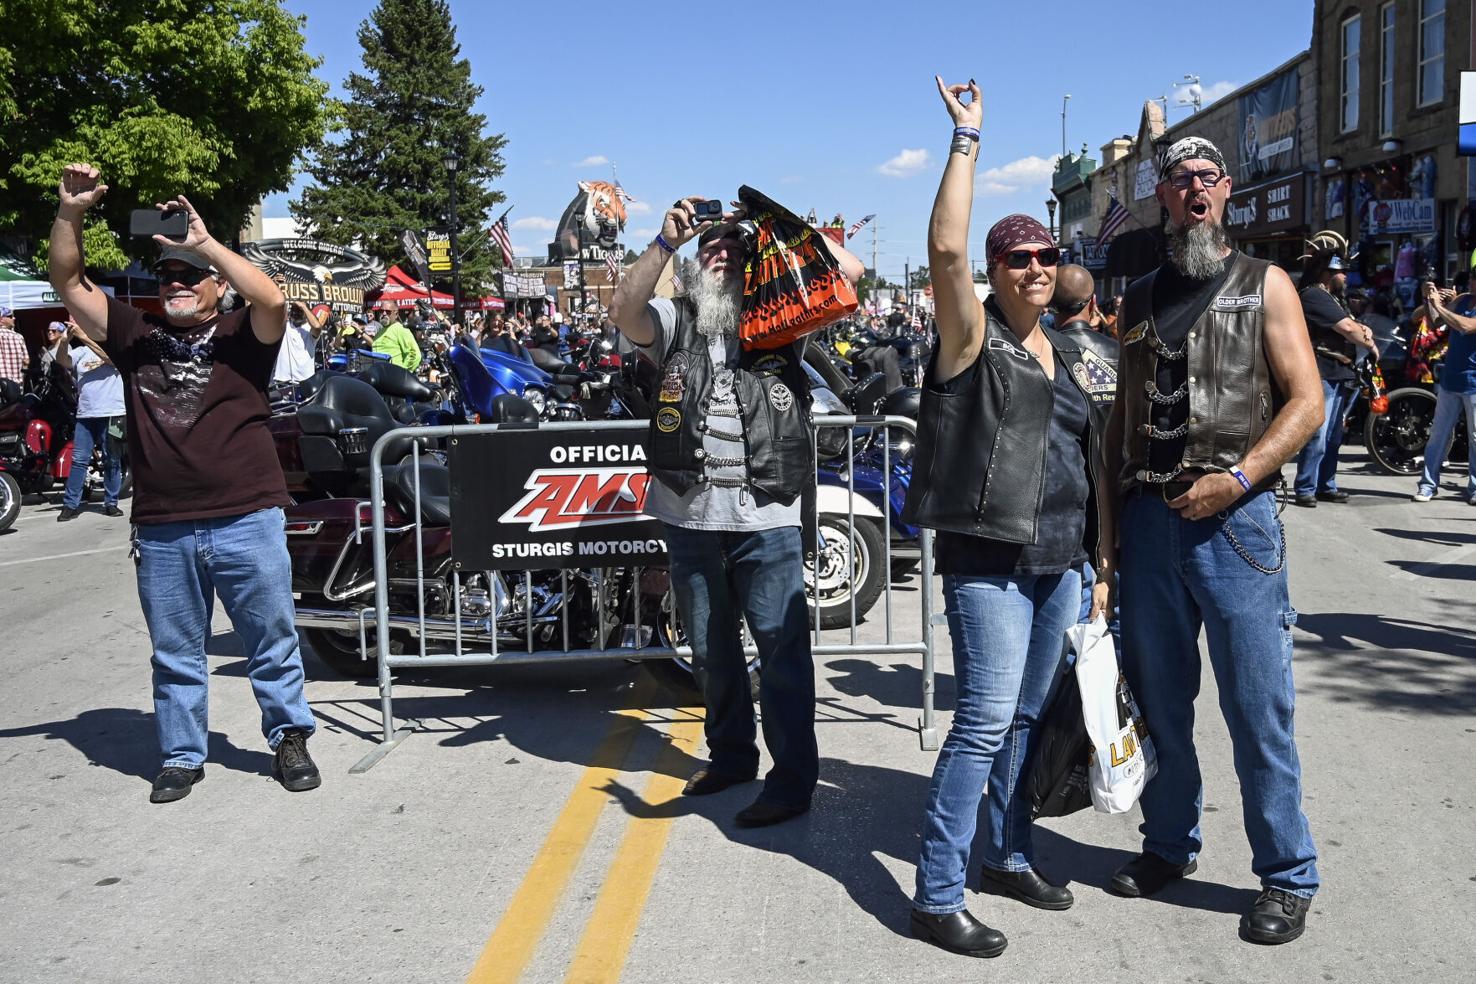 PHOTOS and VIDEO: Rally goers brave the heat as Sturgis Motorcyle Rally